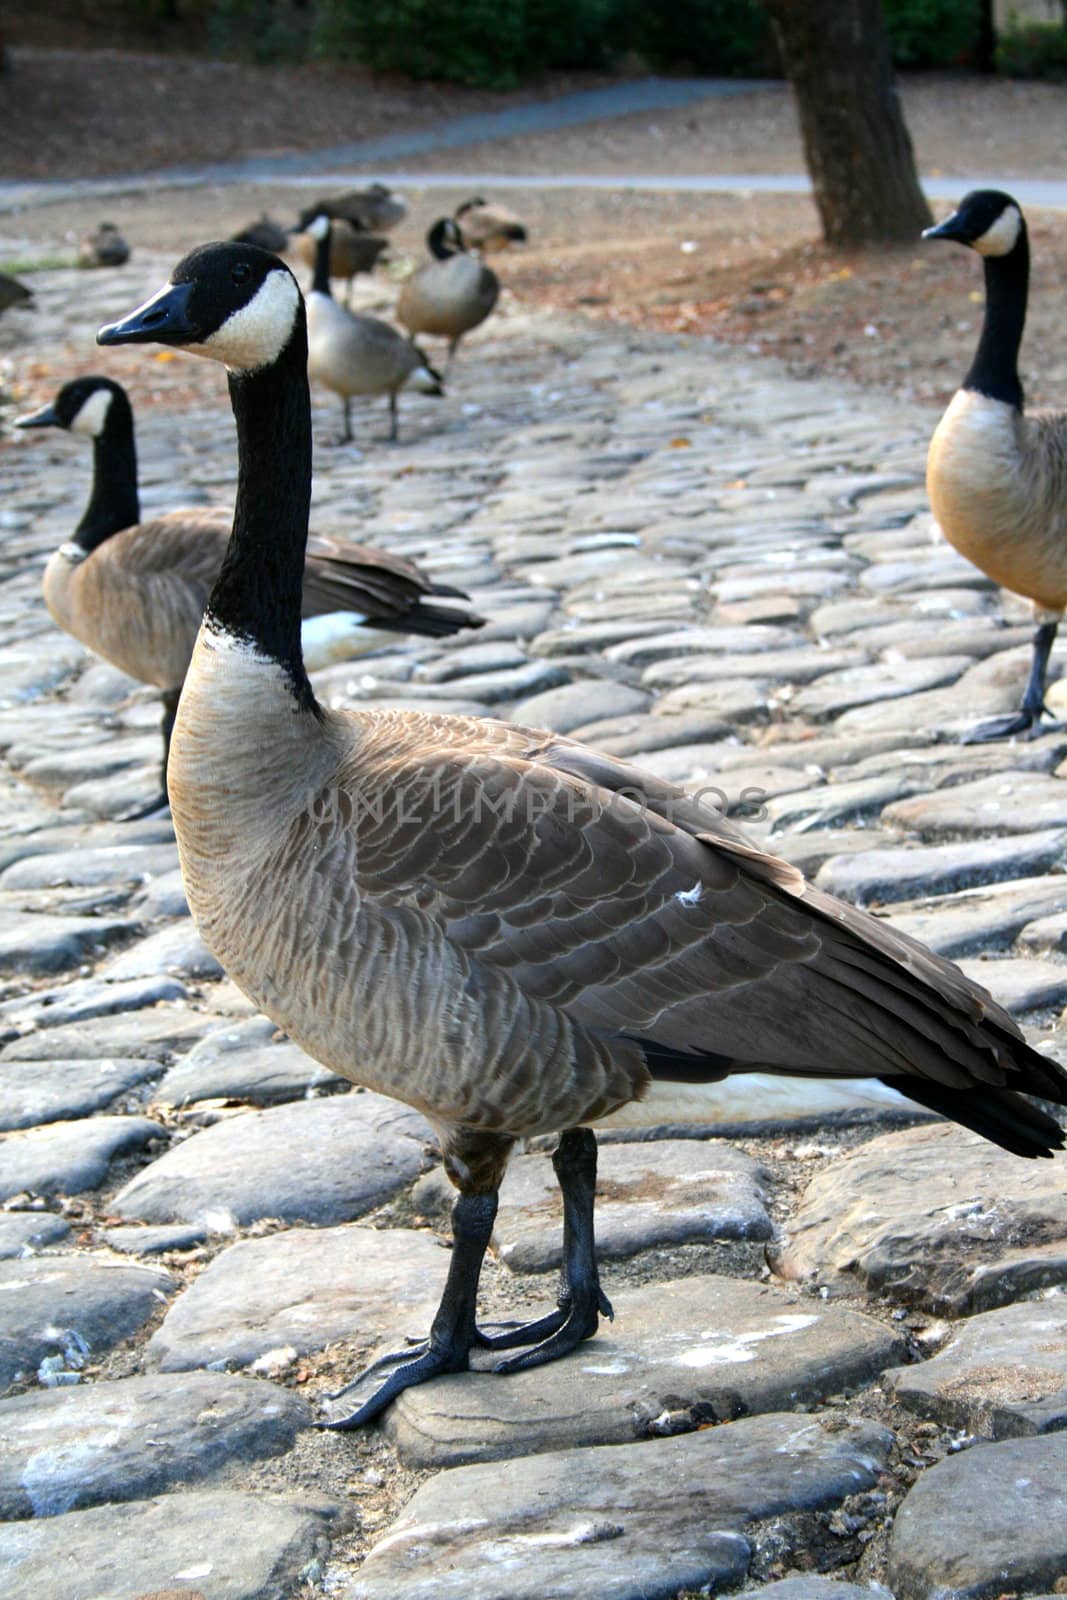 Pack of Canadian geese on a shore near the lake during the day.
